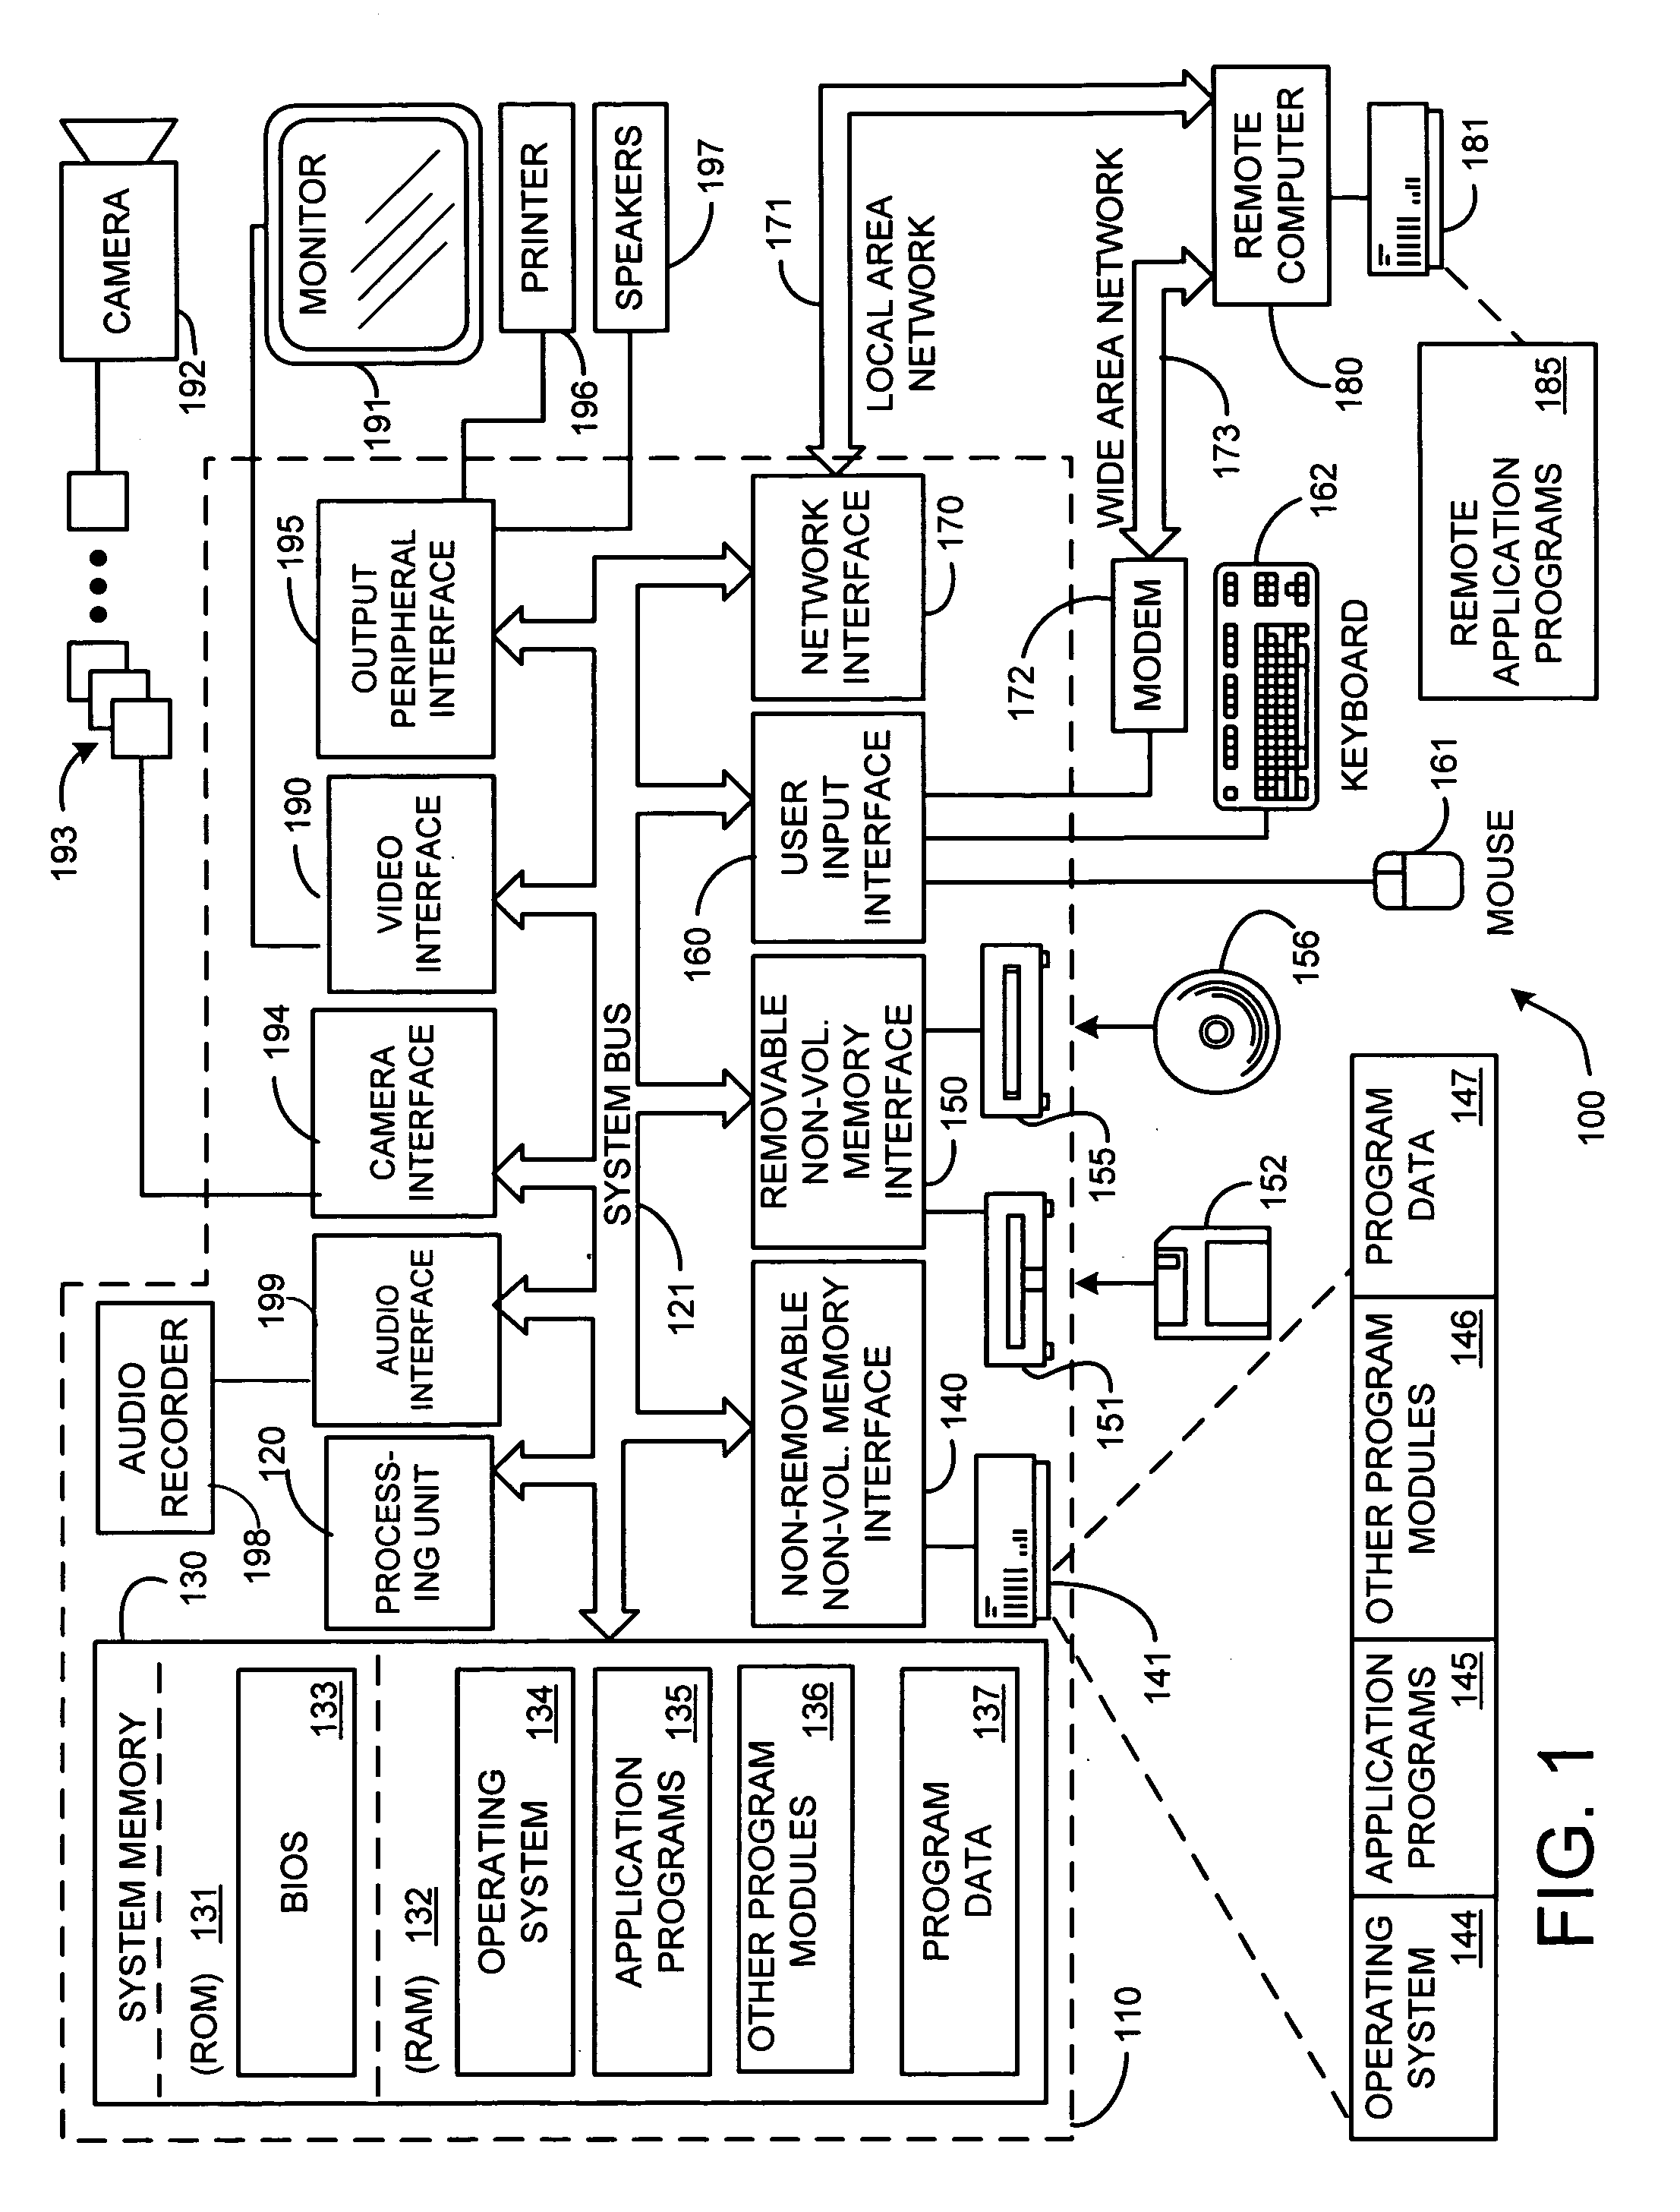 System and method for on-line multi-view video compression